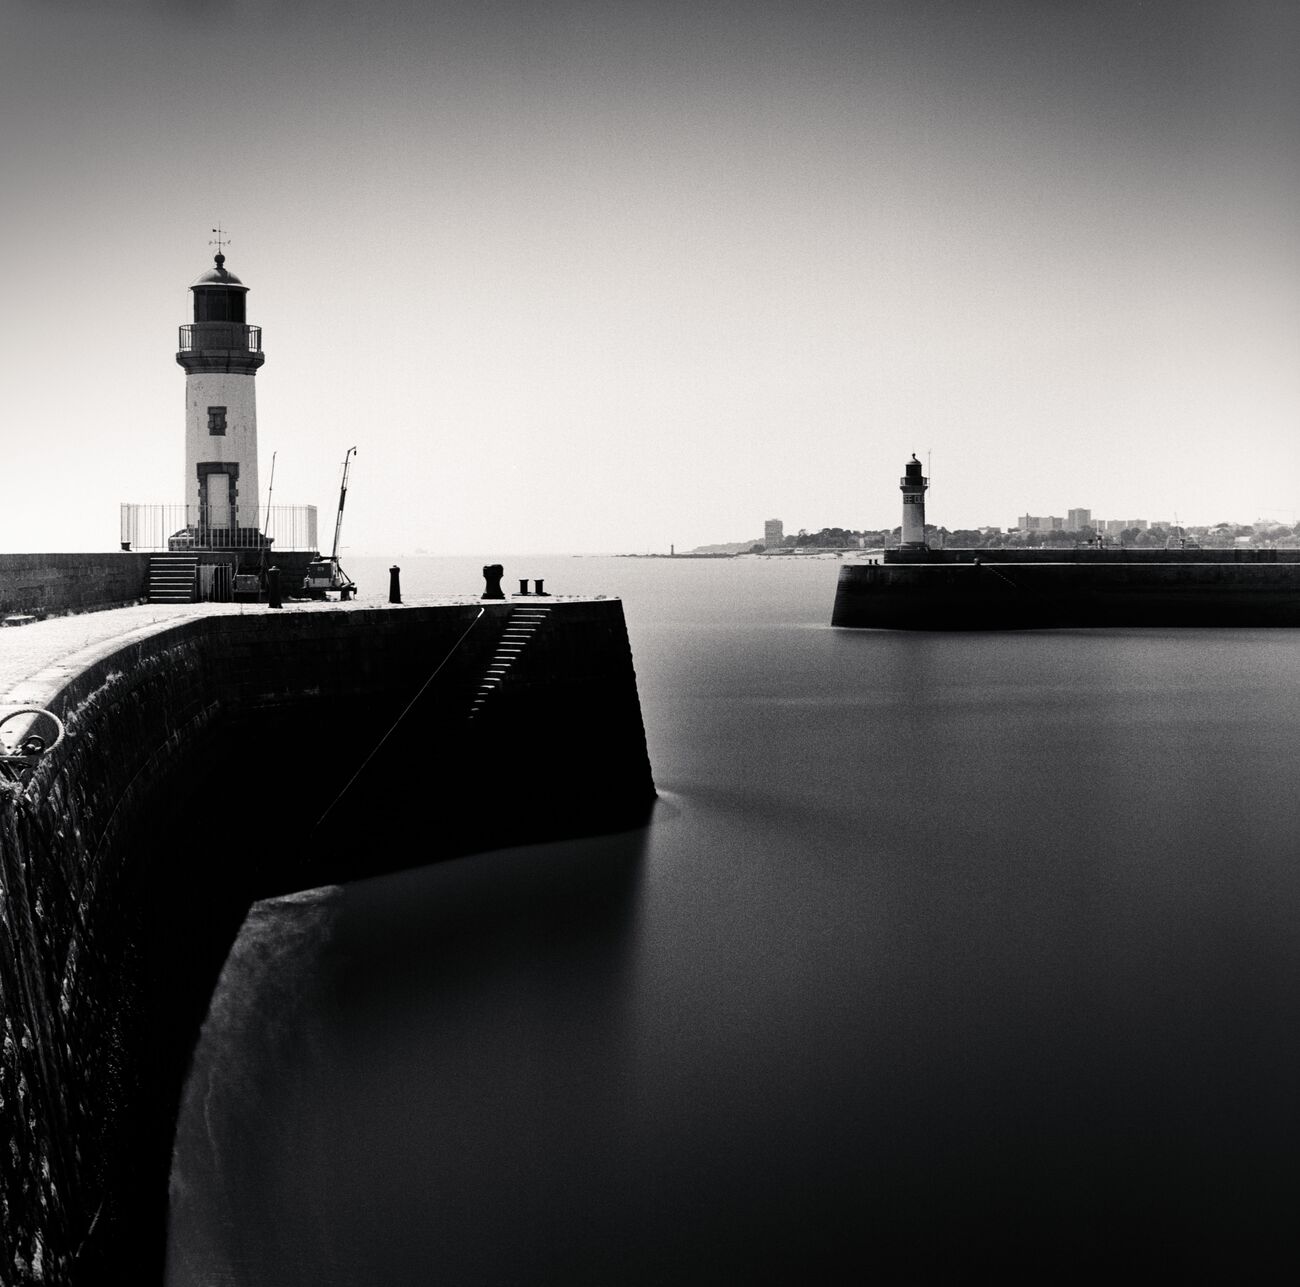 East And West Jetty Lighthouses, Saint-Nazaire, France. August 2020. Ref-1425 - Denis Olivier Photography